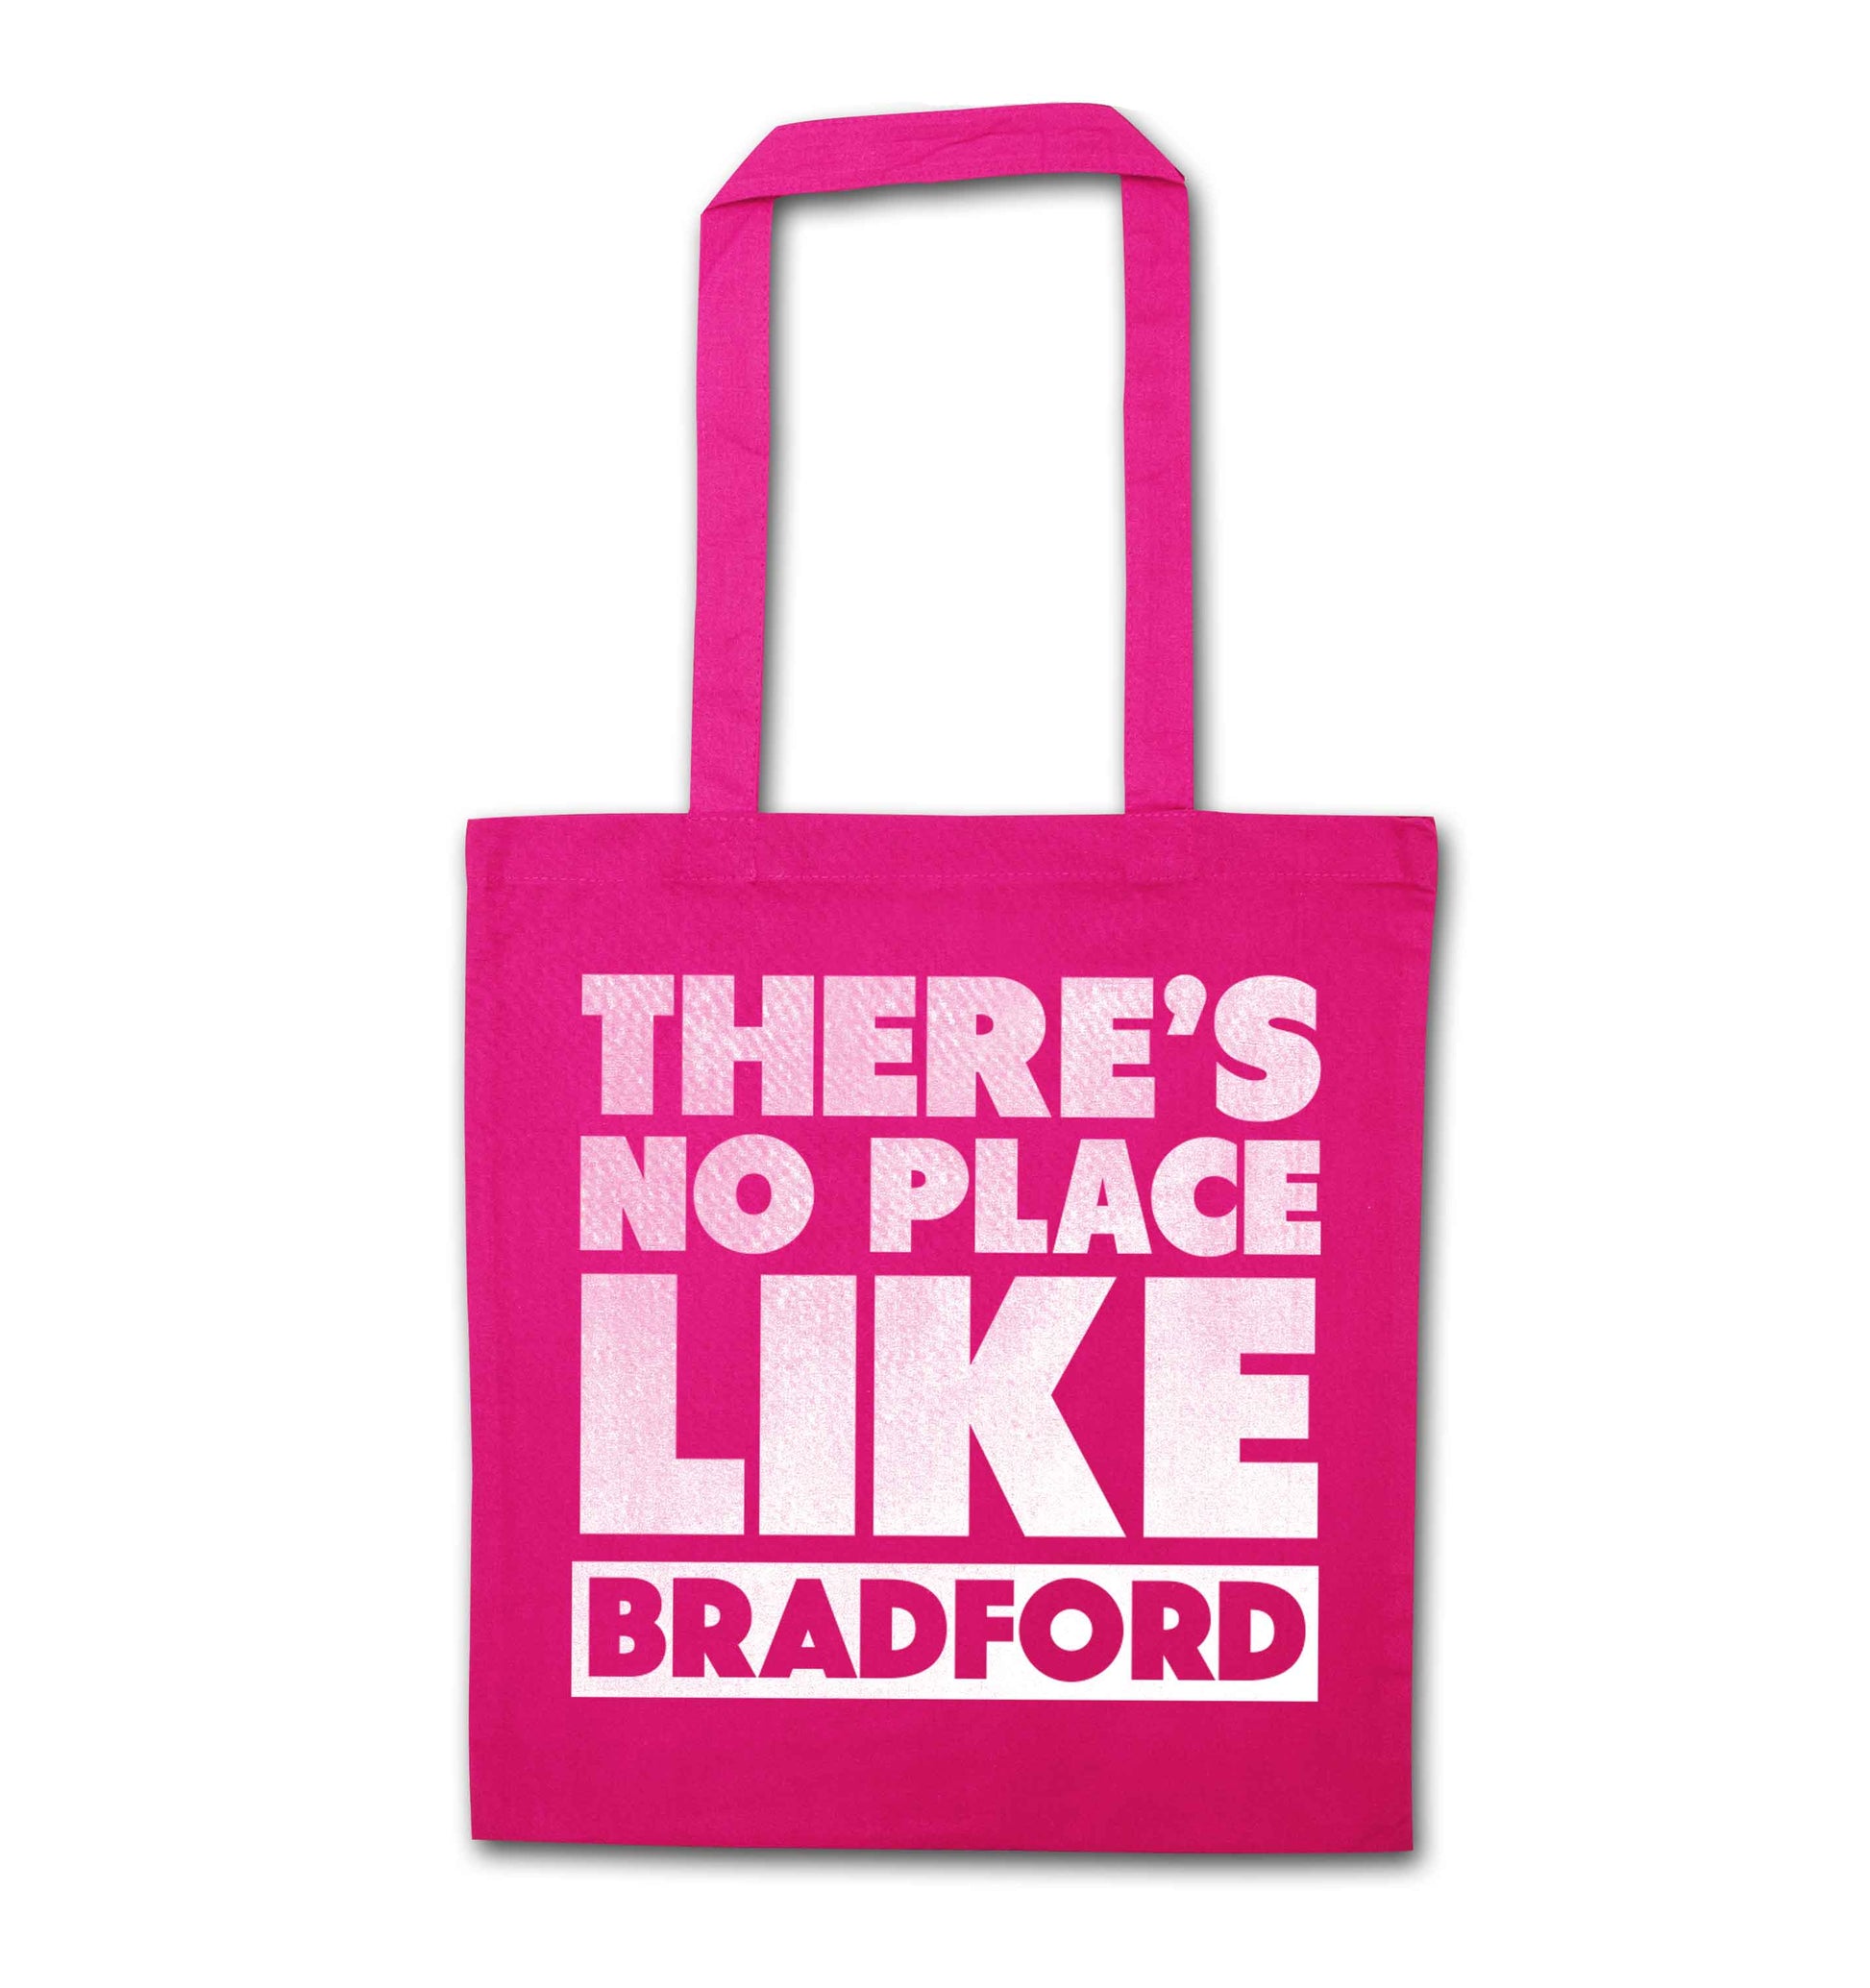 There's no place like Bradford pink tote bag